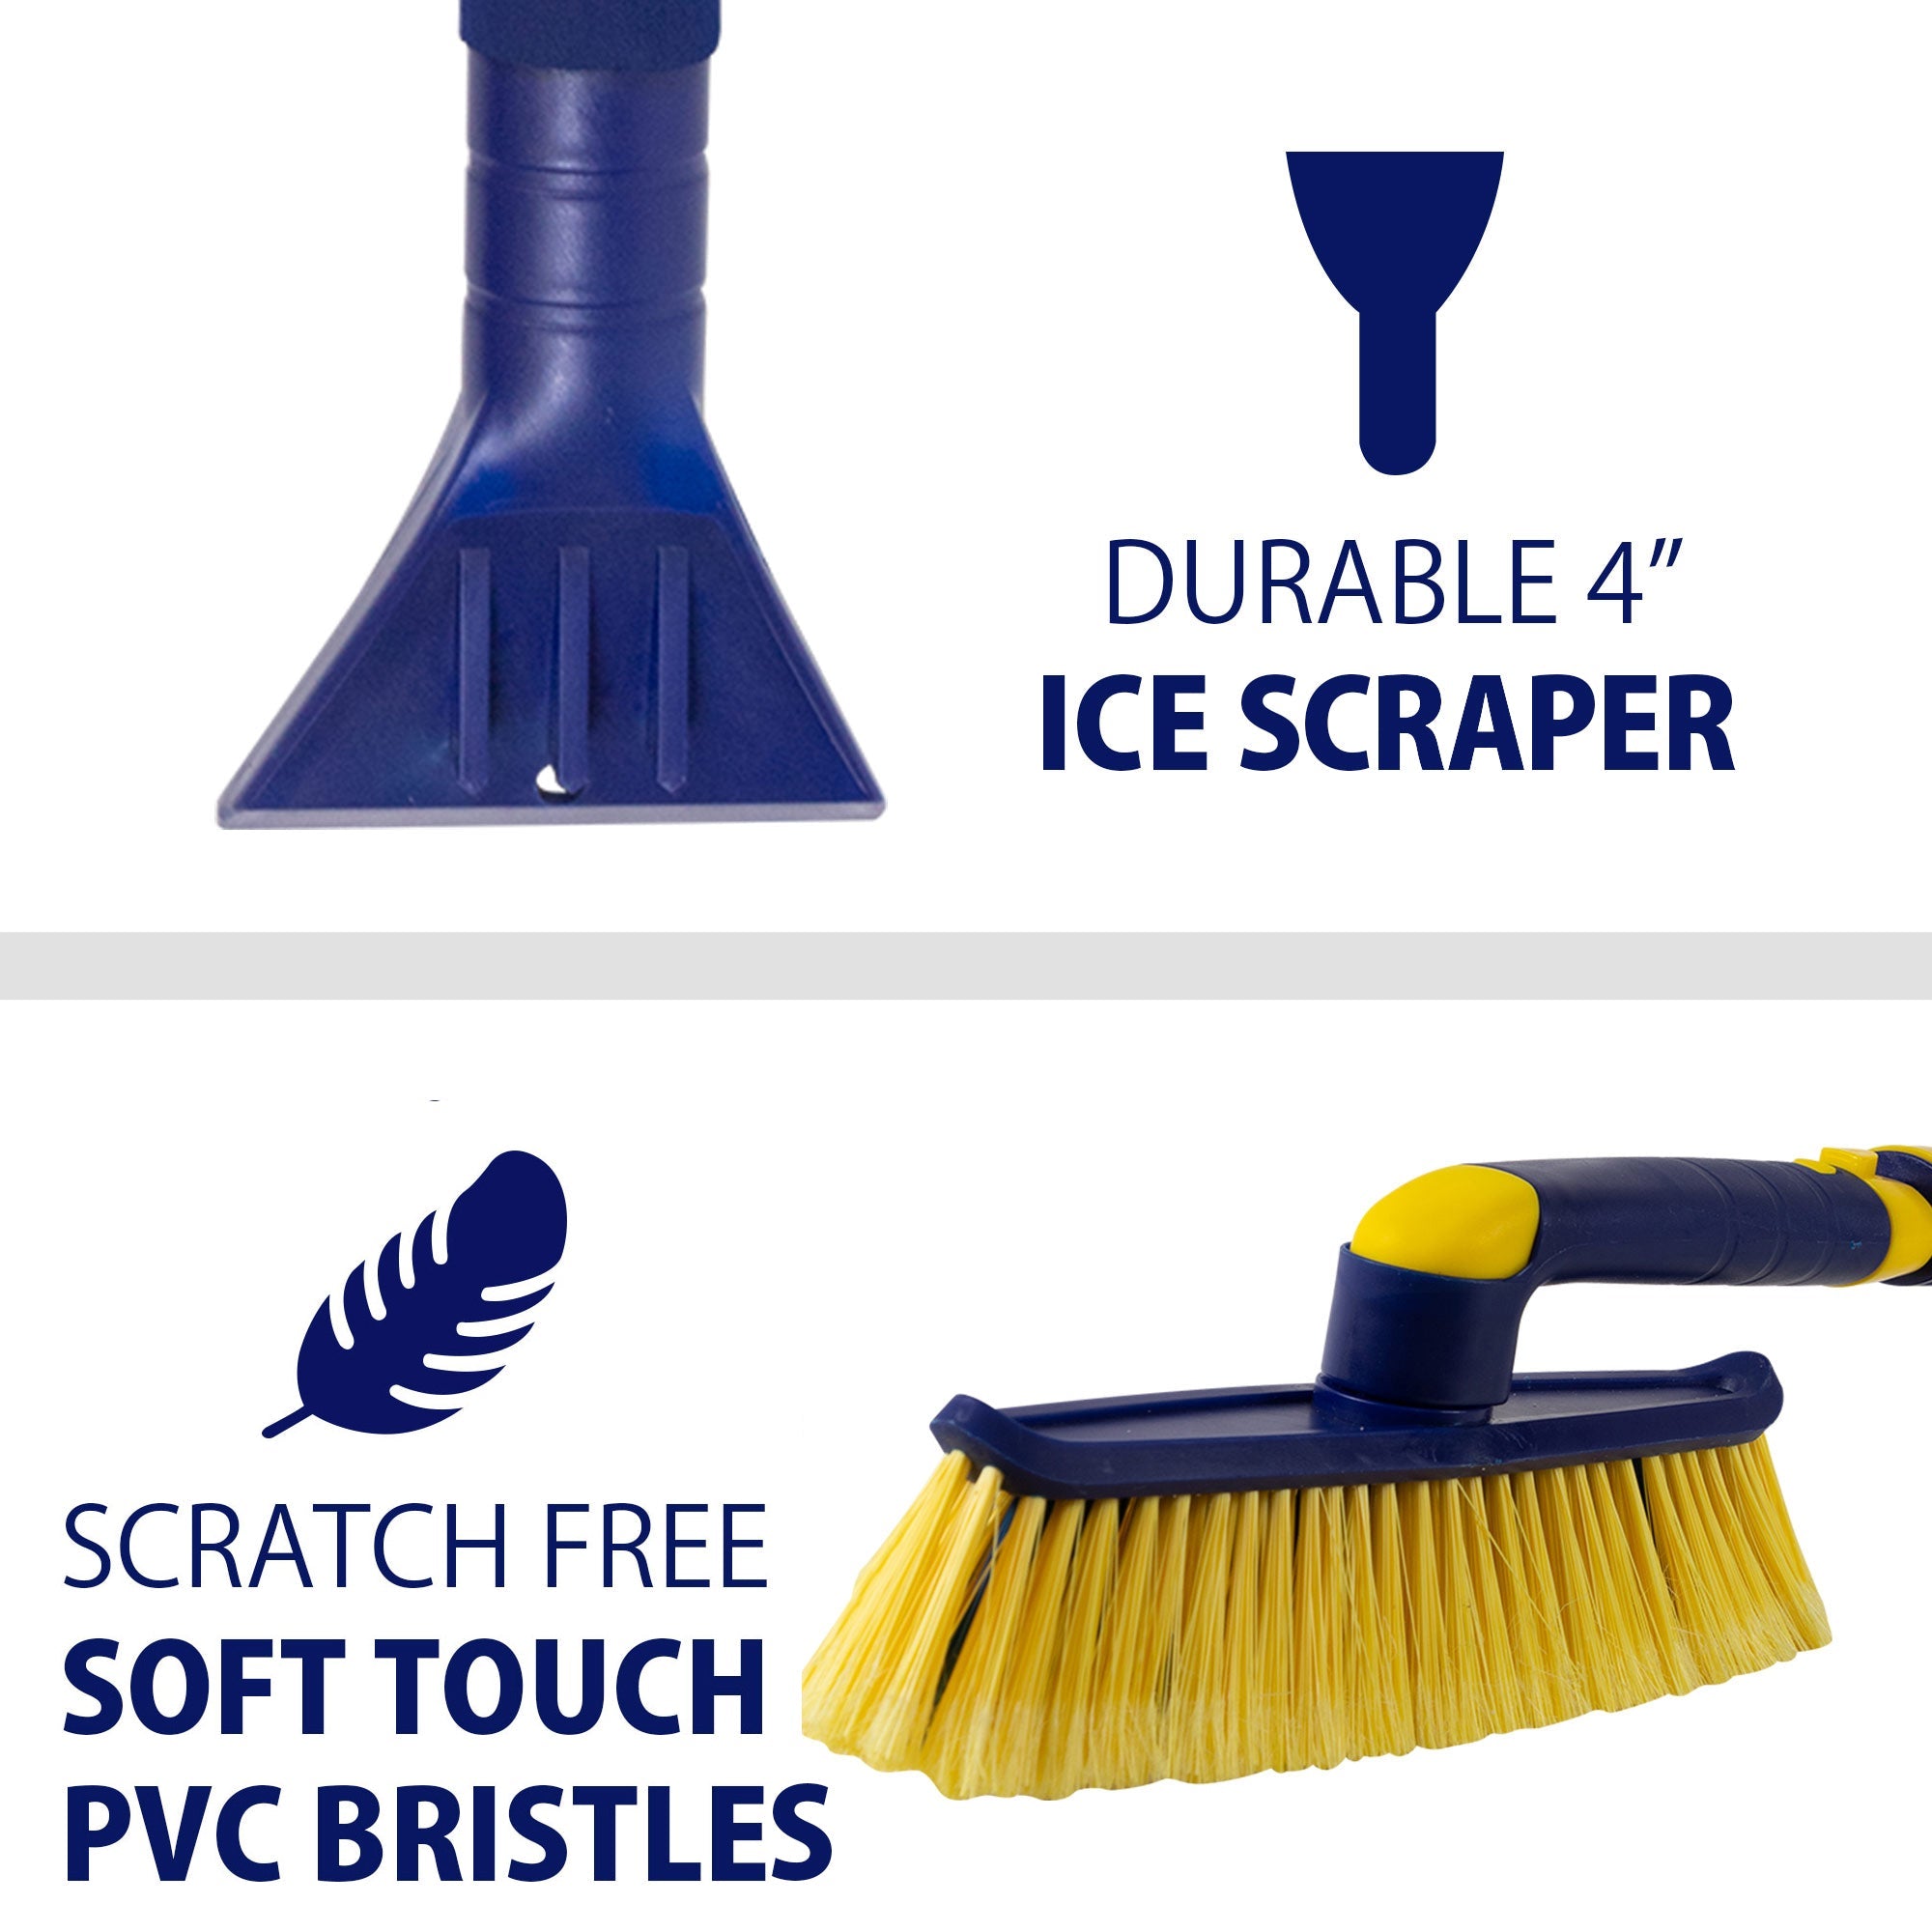 Top half shows a closeup product shot of the ice scraper on a white background with text and icon to the right reading, "Durable 4" ice scraper." Bottom half shows a closeup product shot of the brush head with text and icon to the left reading, "Scratch free soft touch PVC bristles"